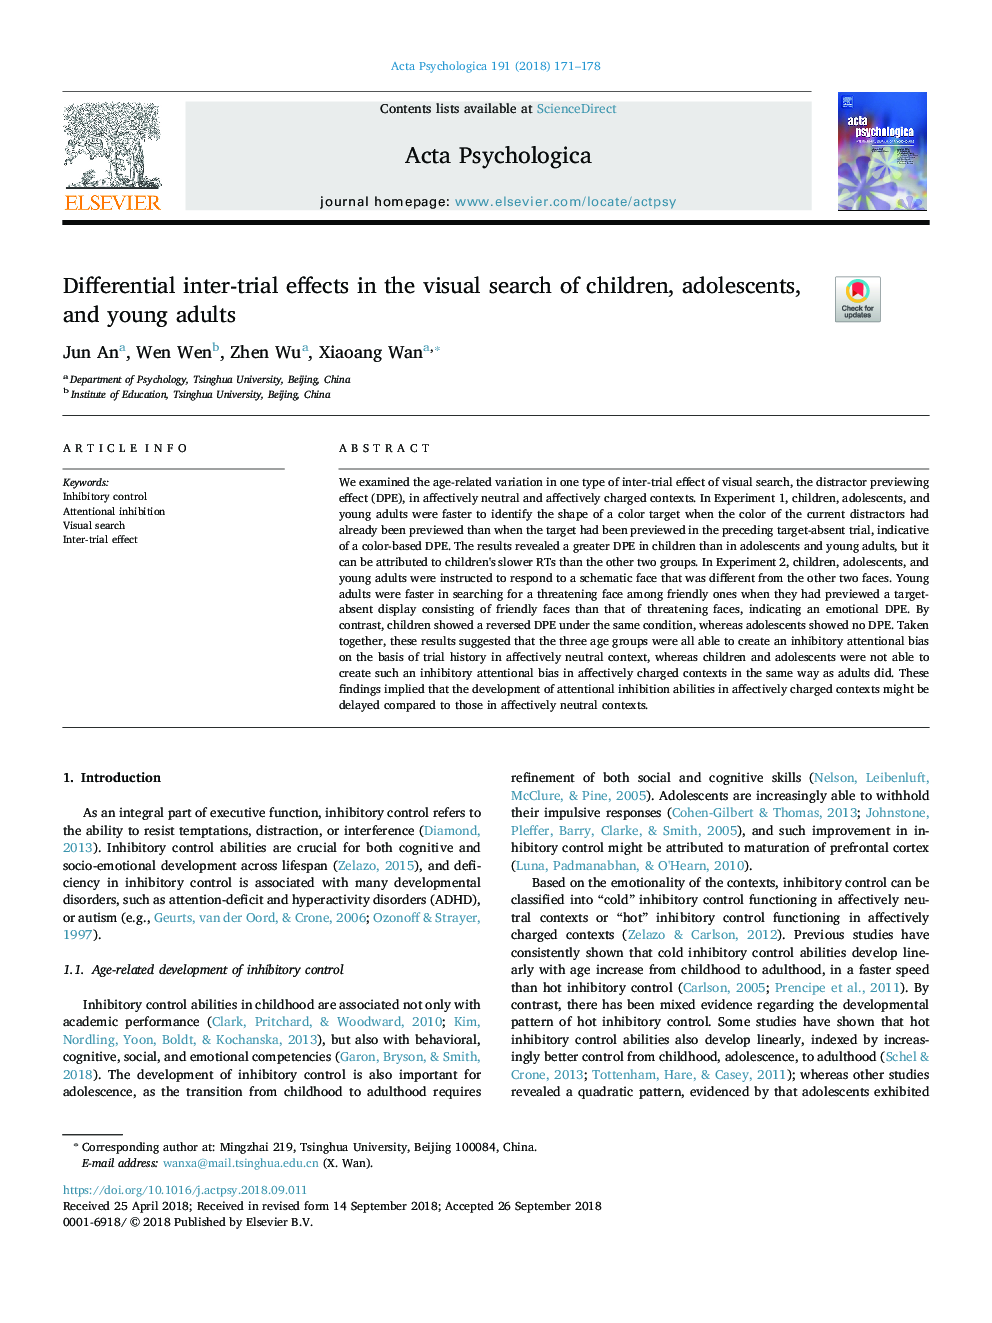 Differential inter-trial effects in the visual search of children, adolescents, and young adults